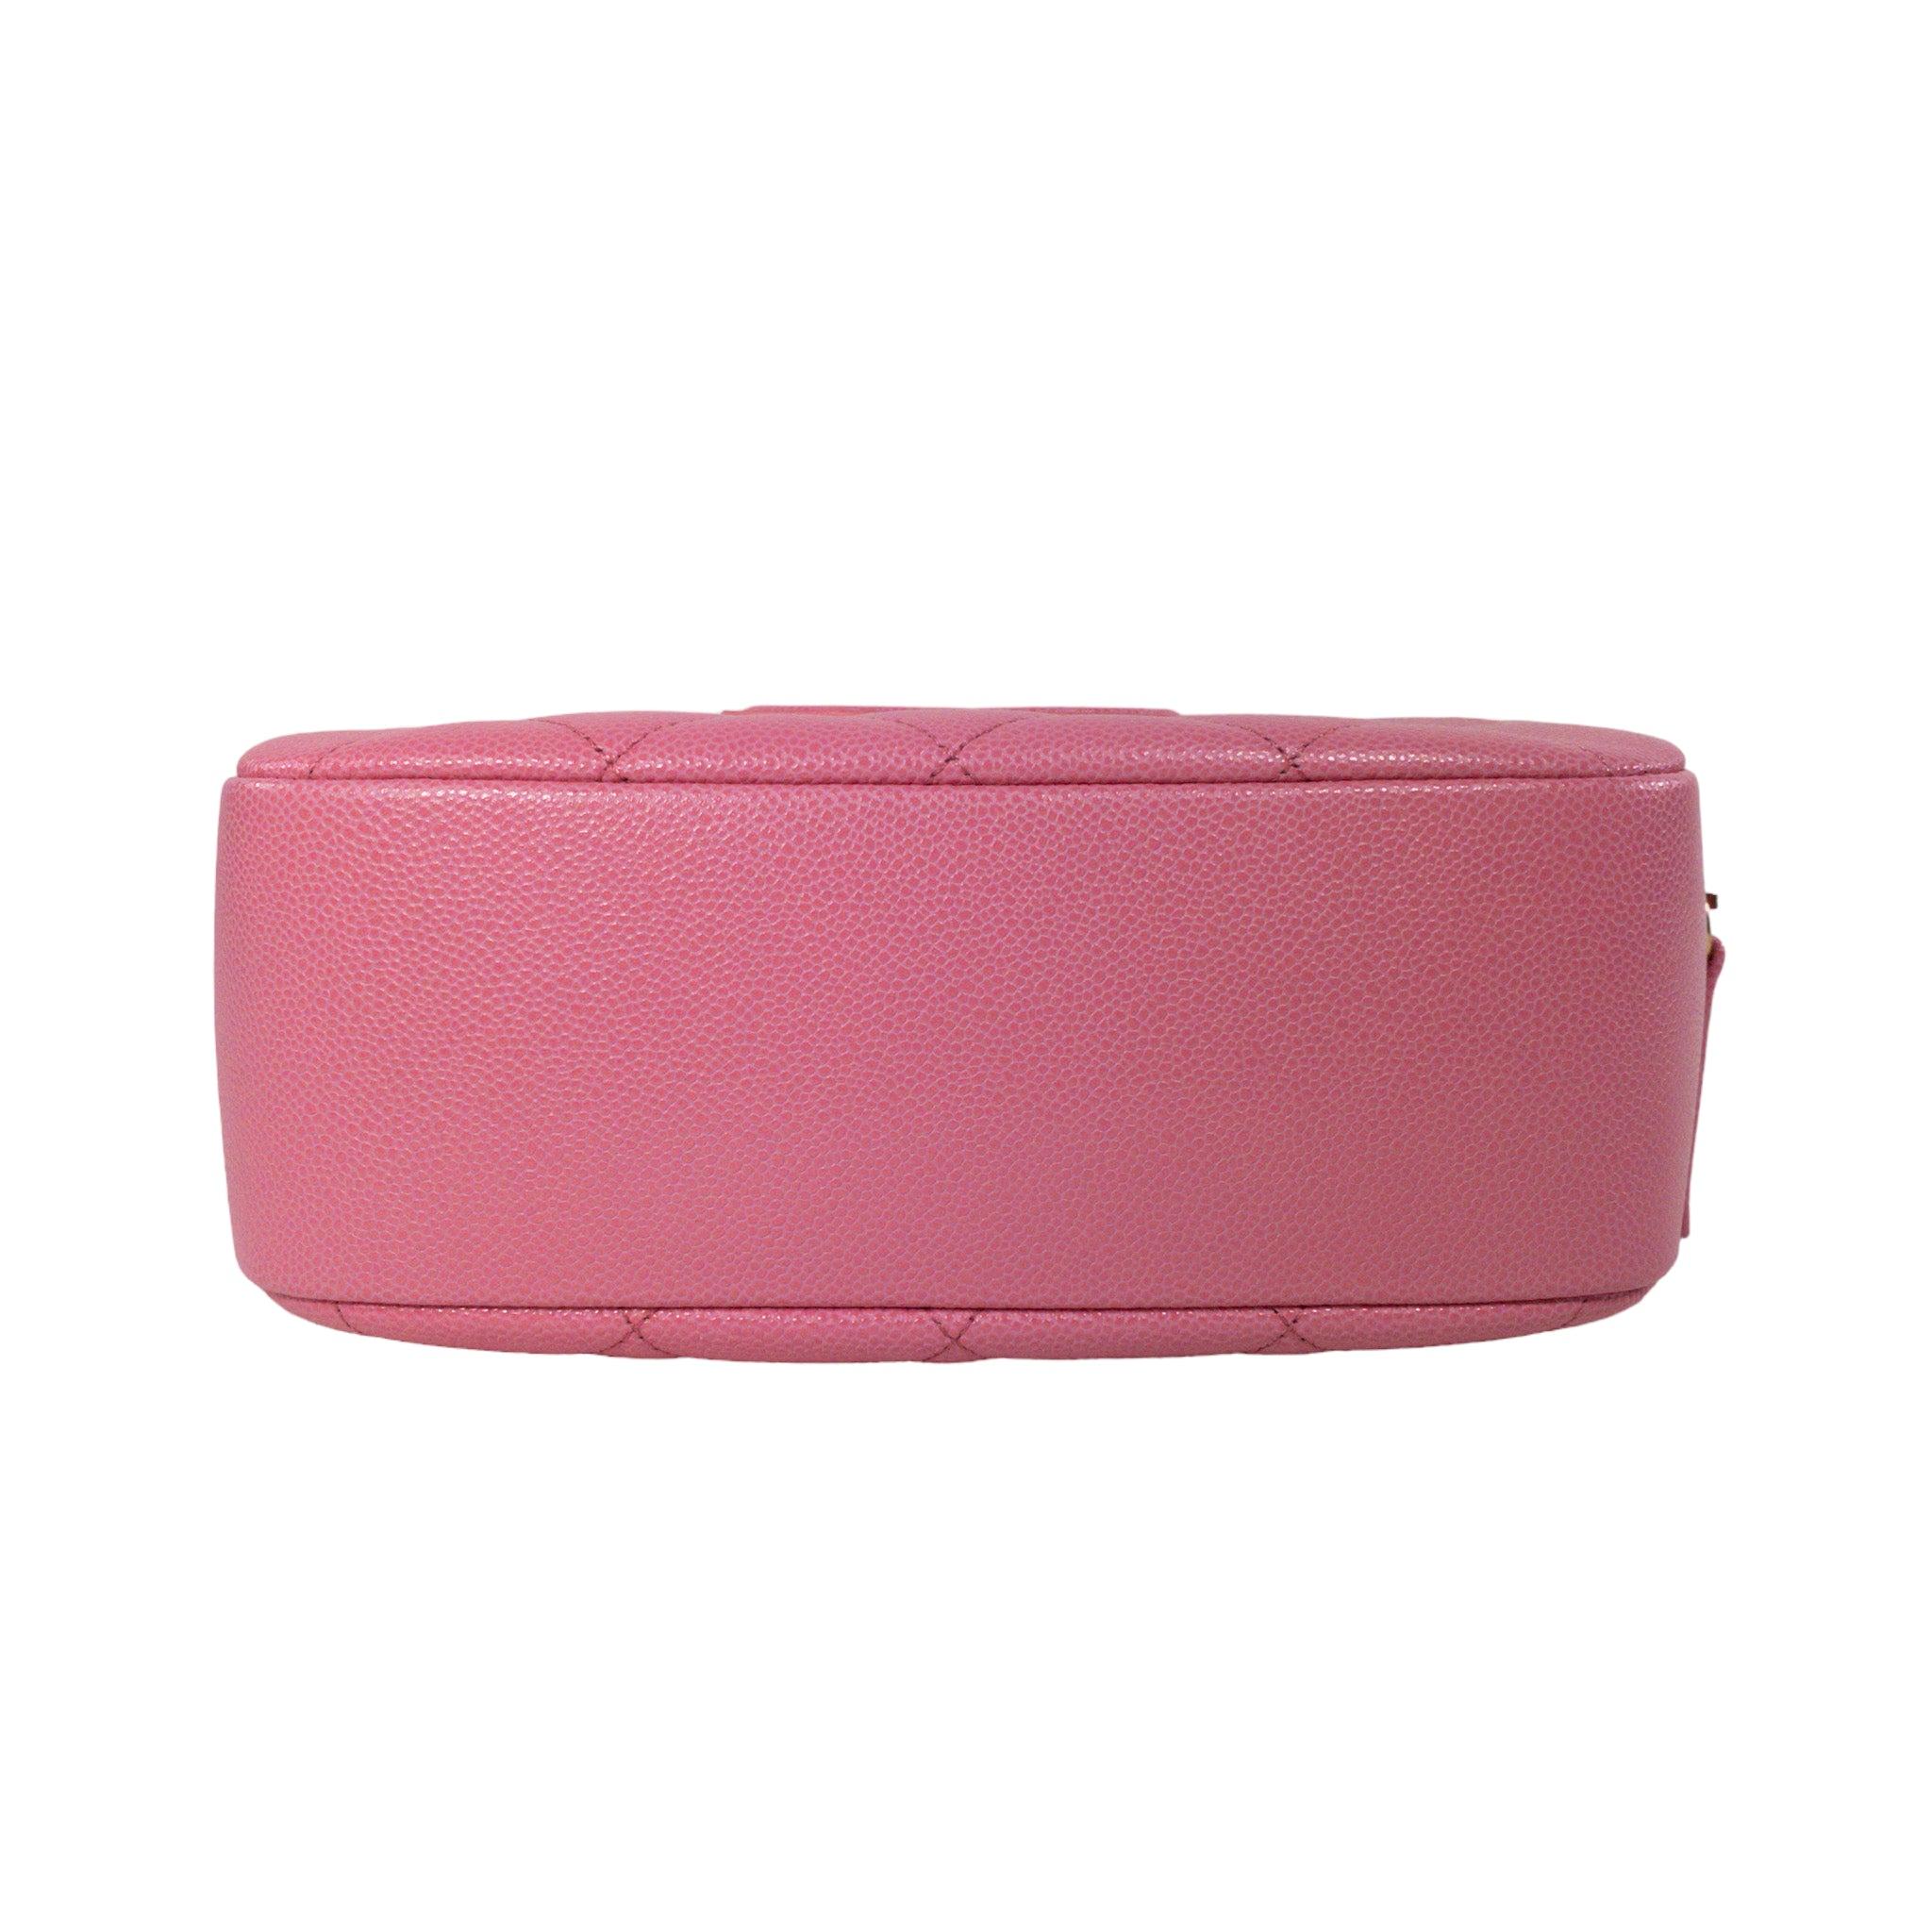 Chanel Pink Caviar Vanity Case  In Excellent Condition For Sale In Miami Beach, FL